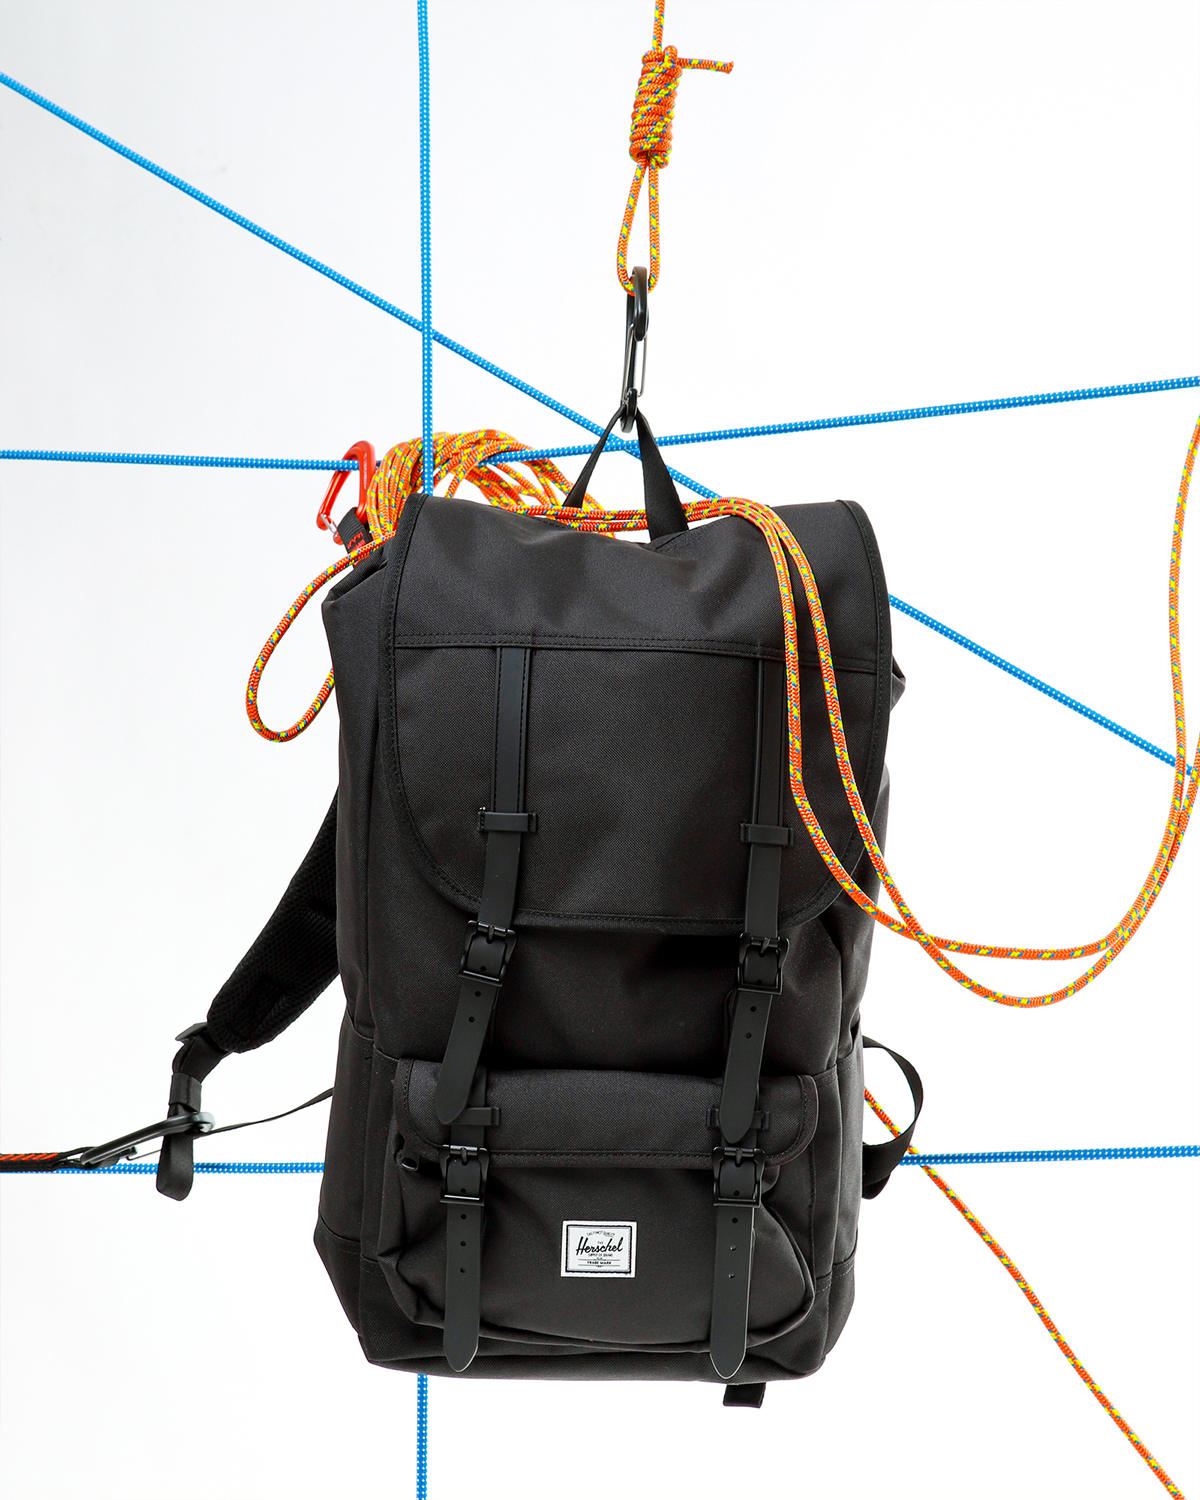 Take a look at the Herschel Pro Series